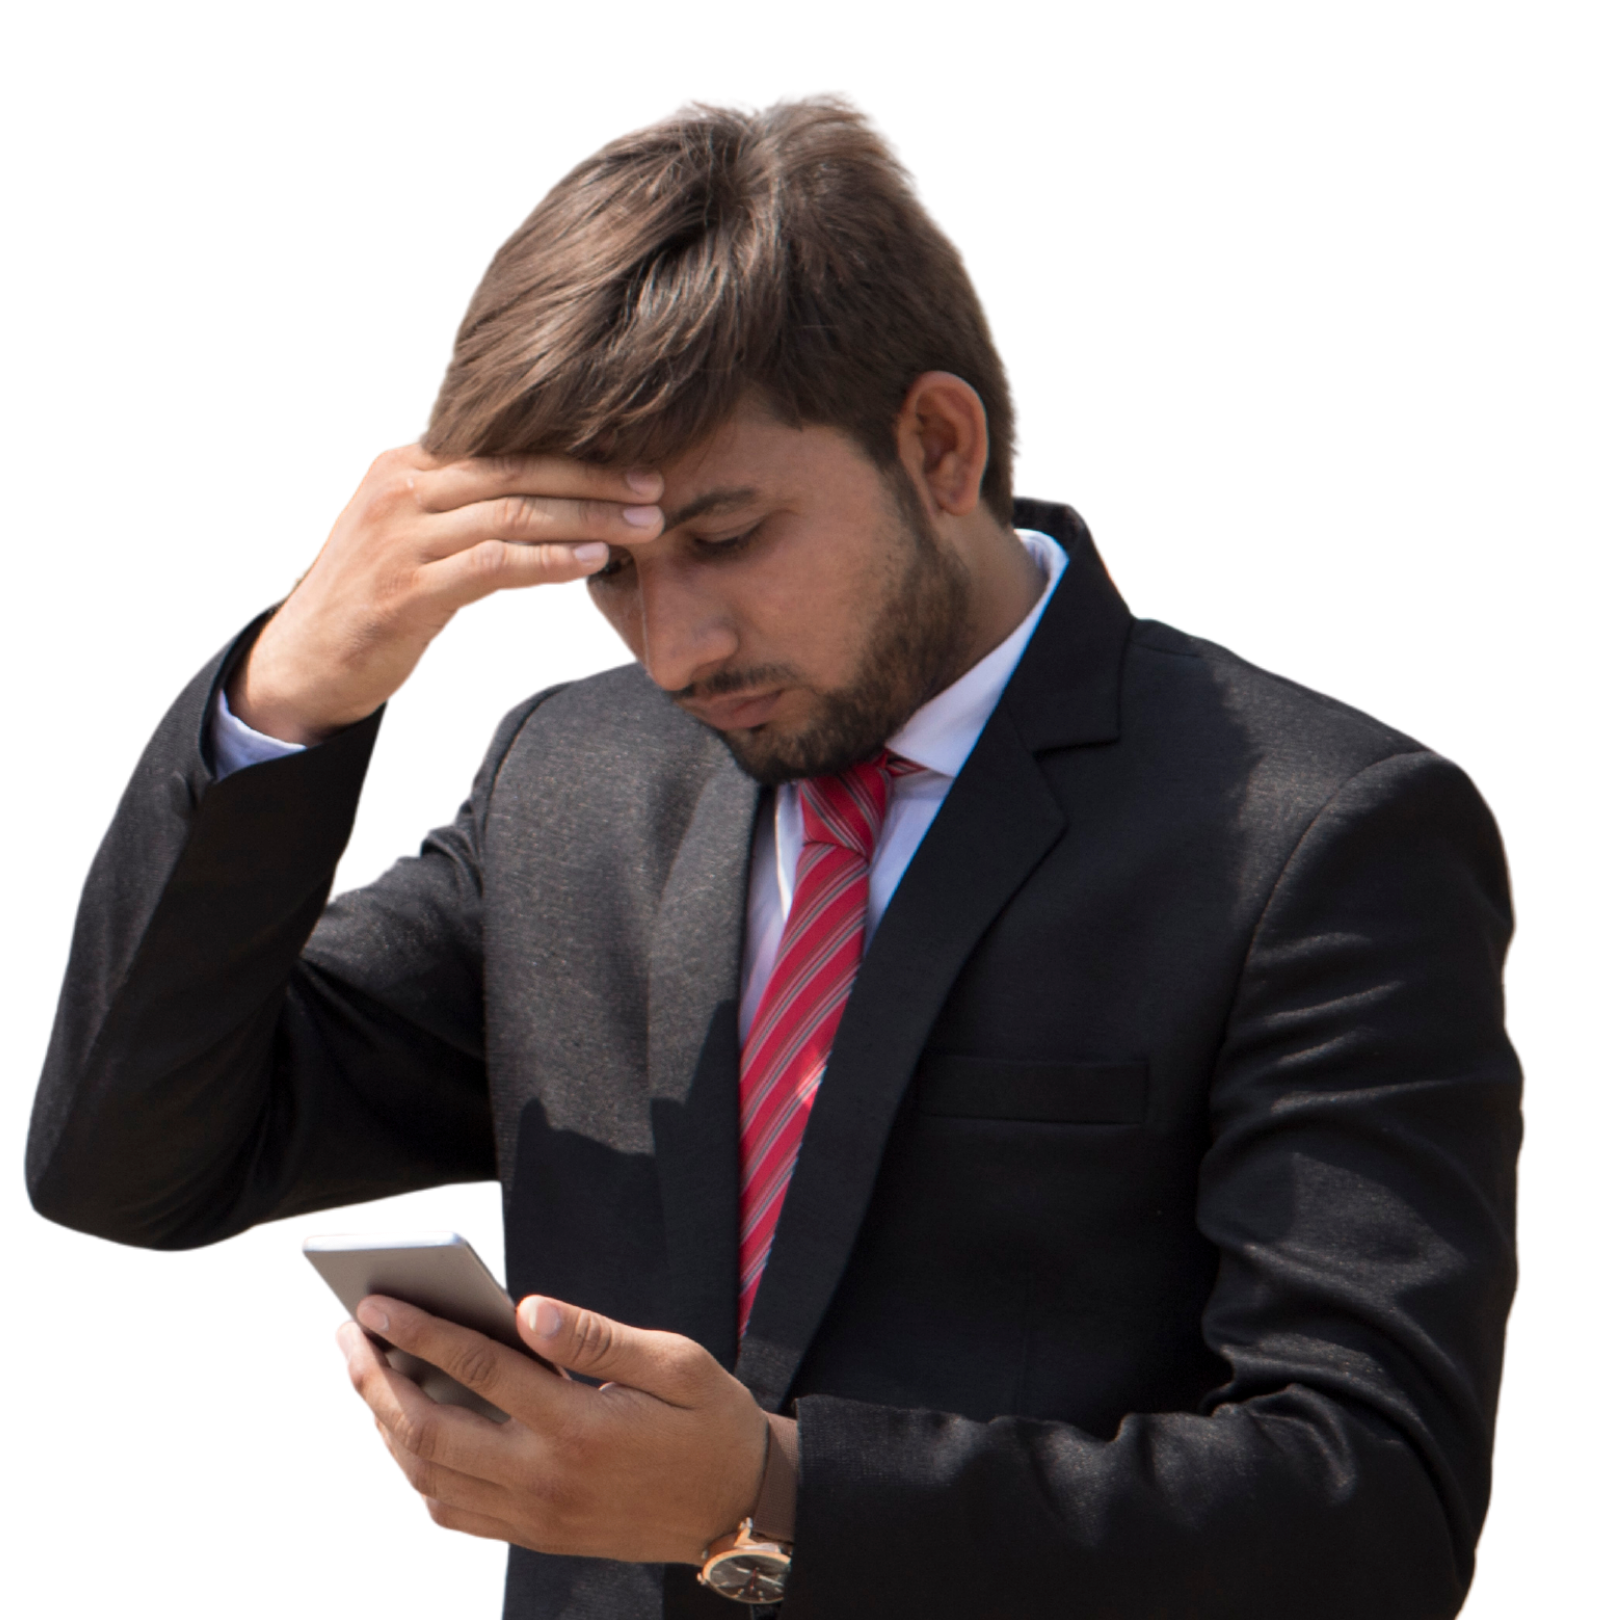 Man Struggling With Job Hunt On His Phone